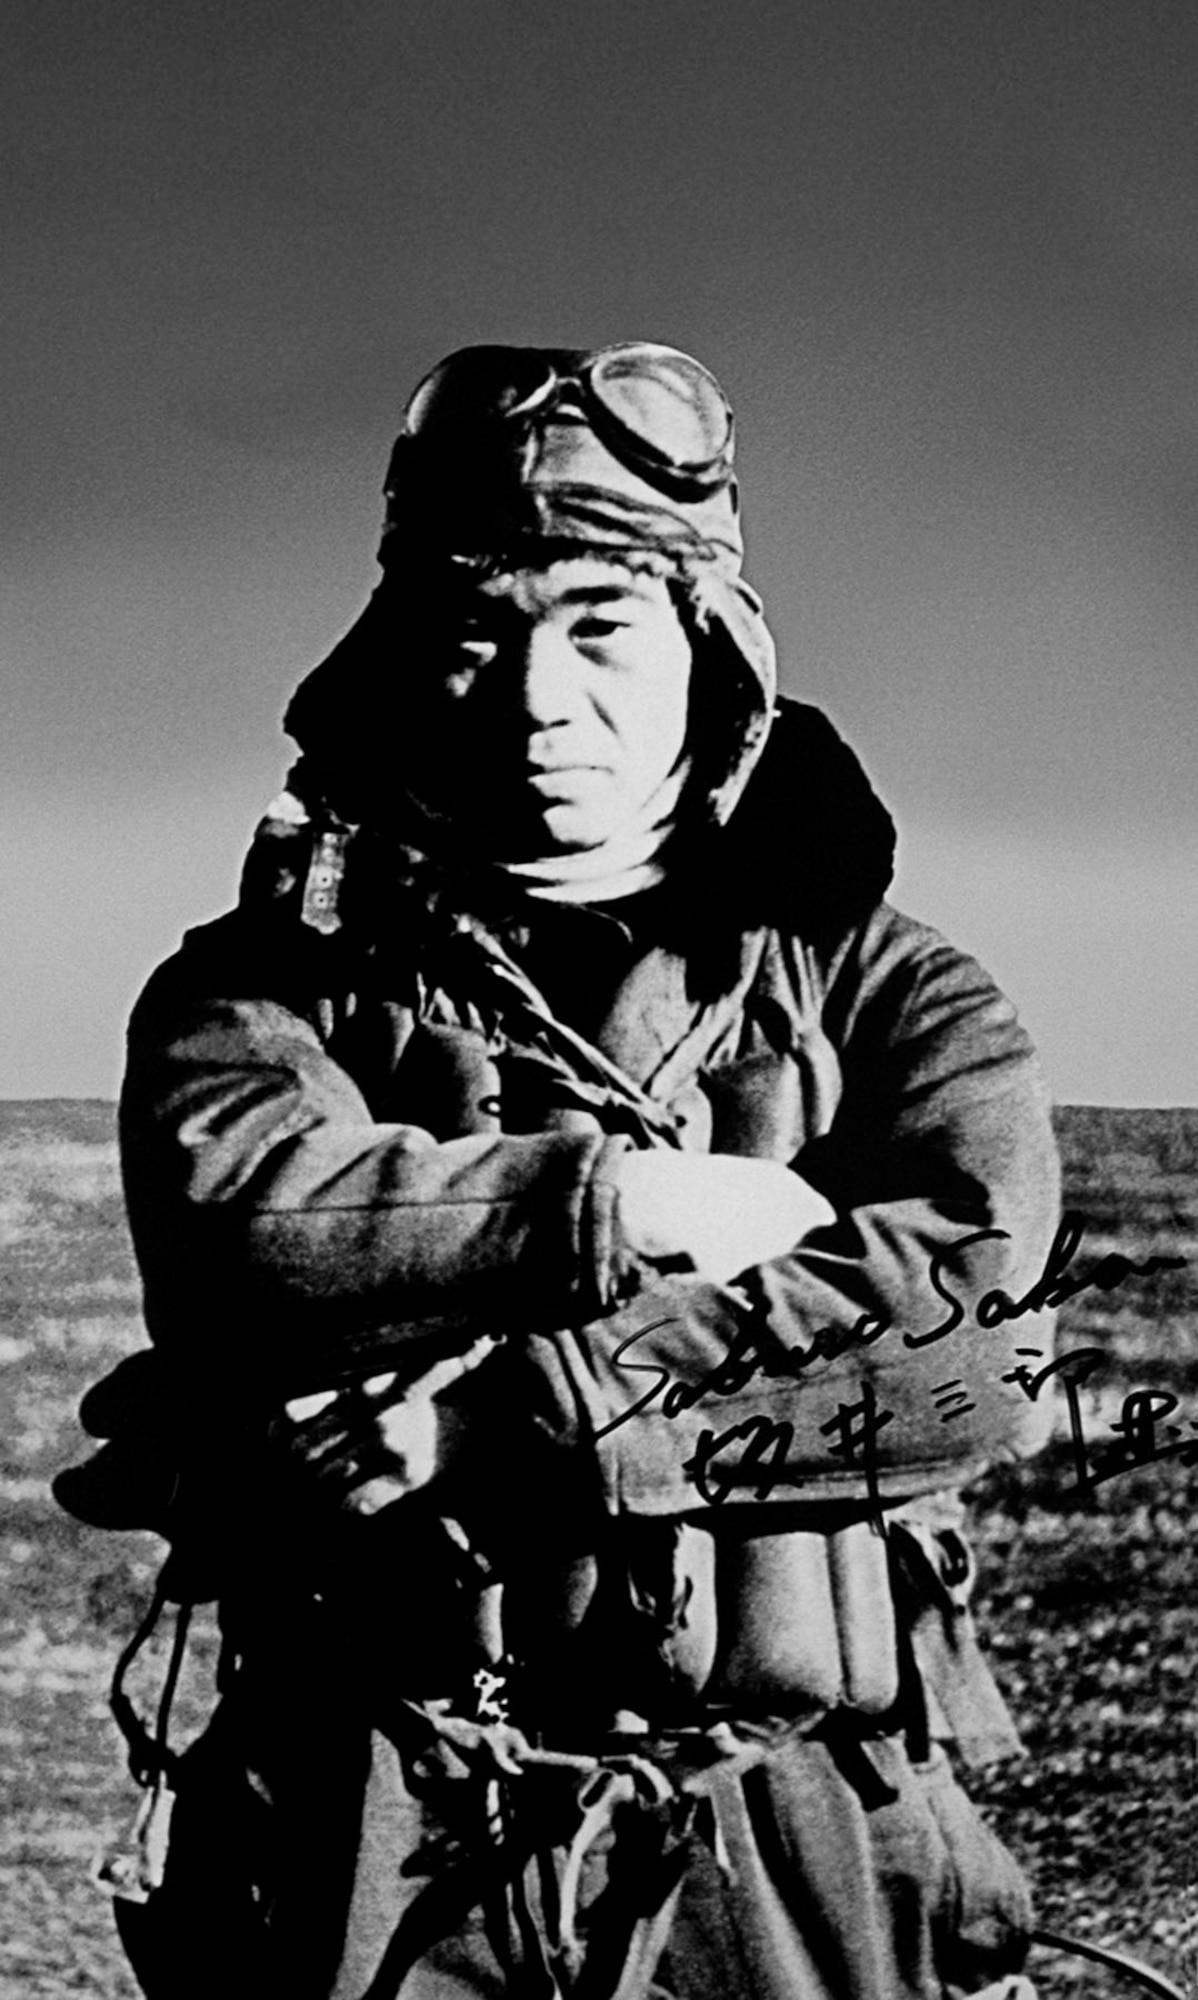 Saburo Sakai, with 62 victories, was the Imperial Japanese Navy’s second highest scoring pilot to survive World War II. He is wearing a winter flying suit with a fur-lined collar and helmet. (U.S. Air Force photo)